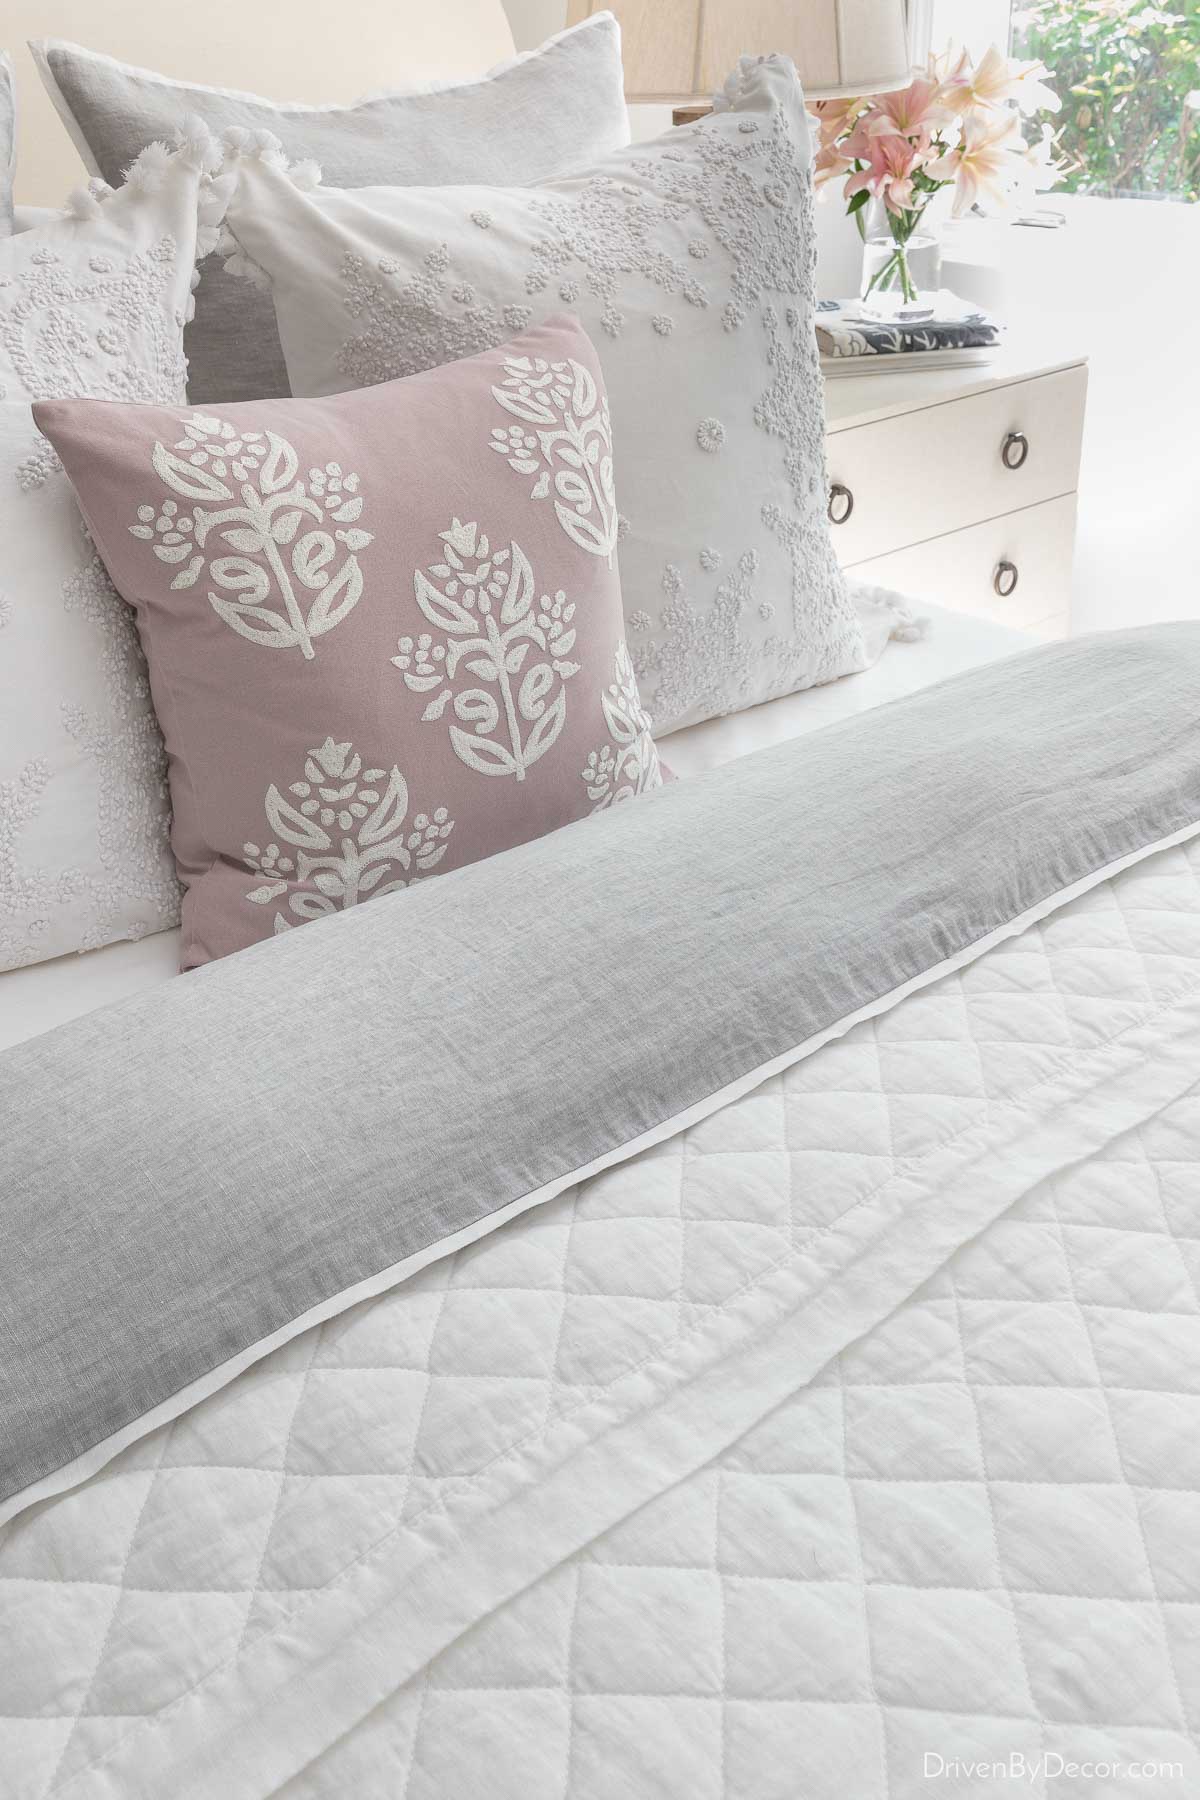 White quilt as a layer of guest room bedding